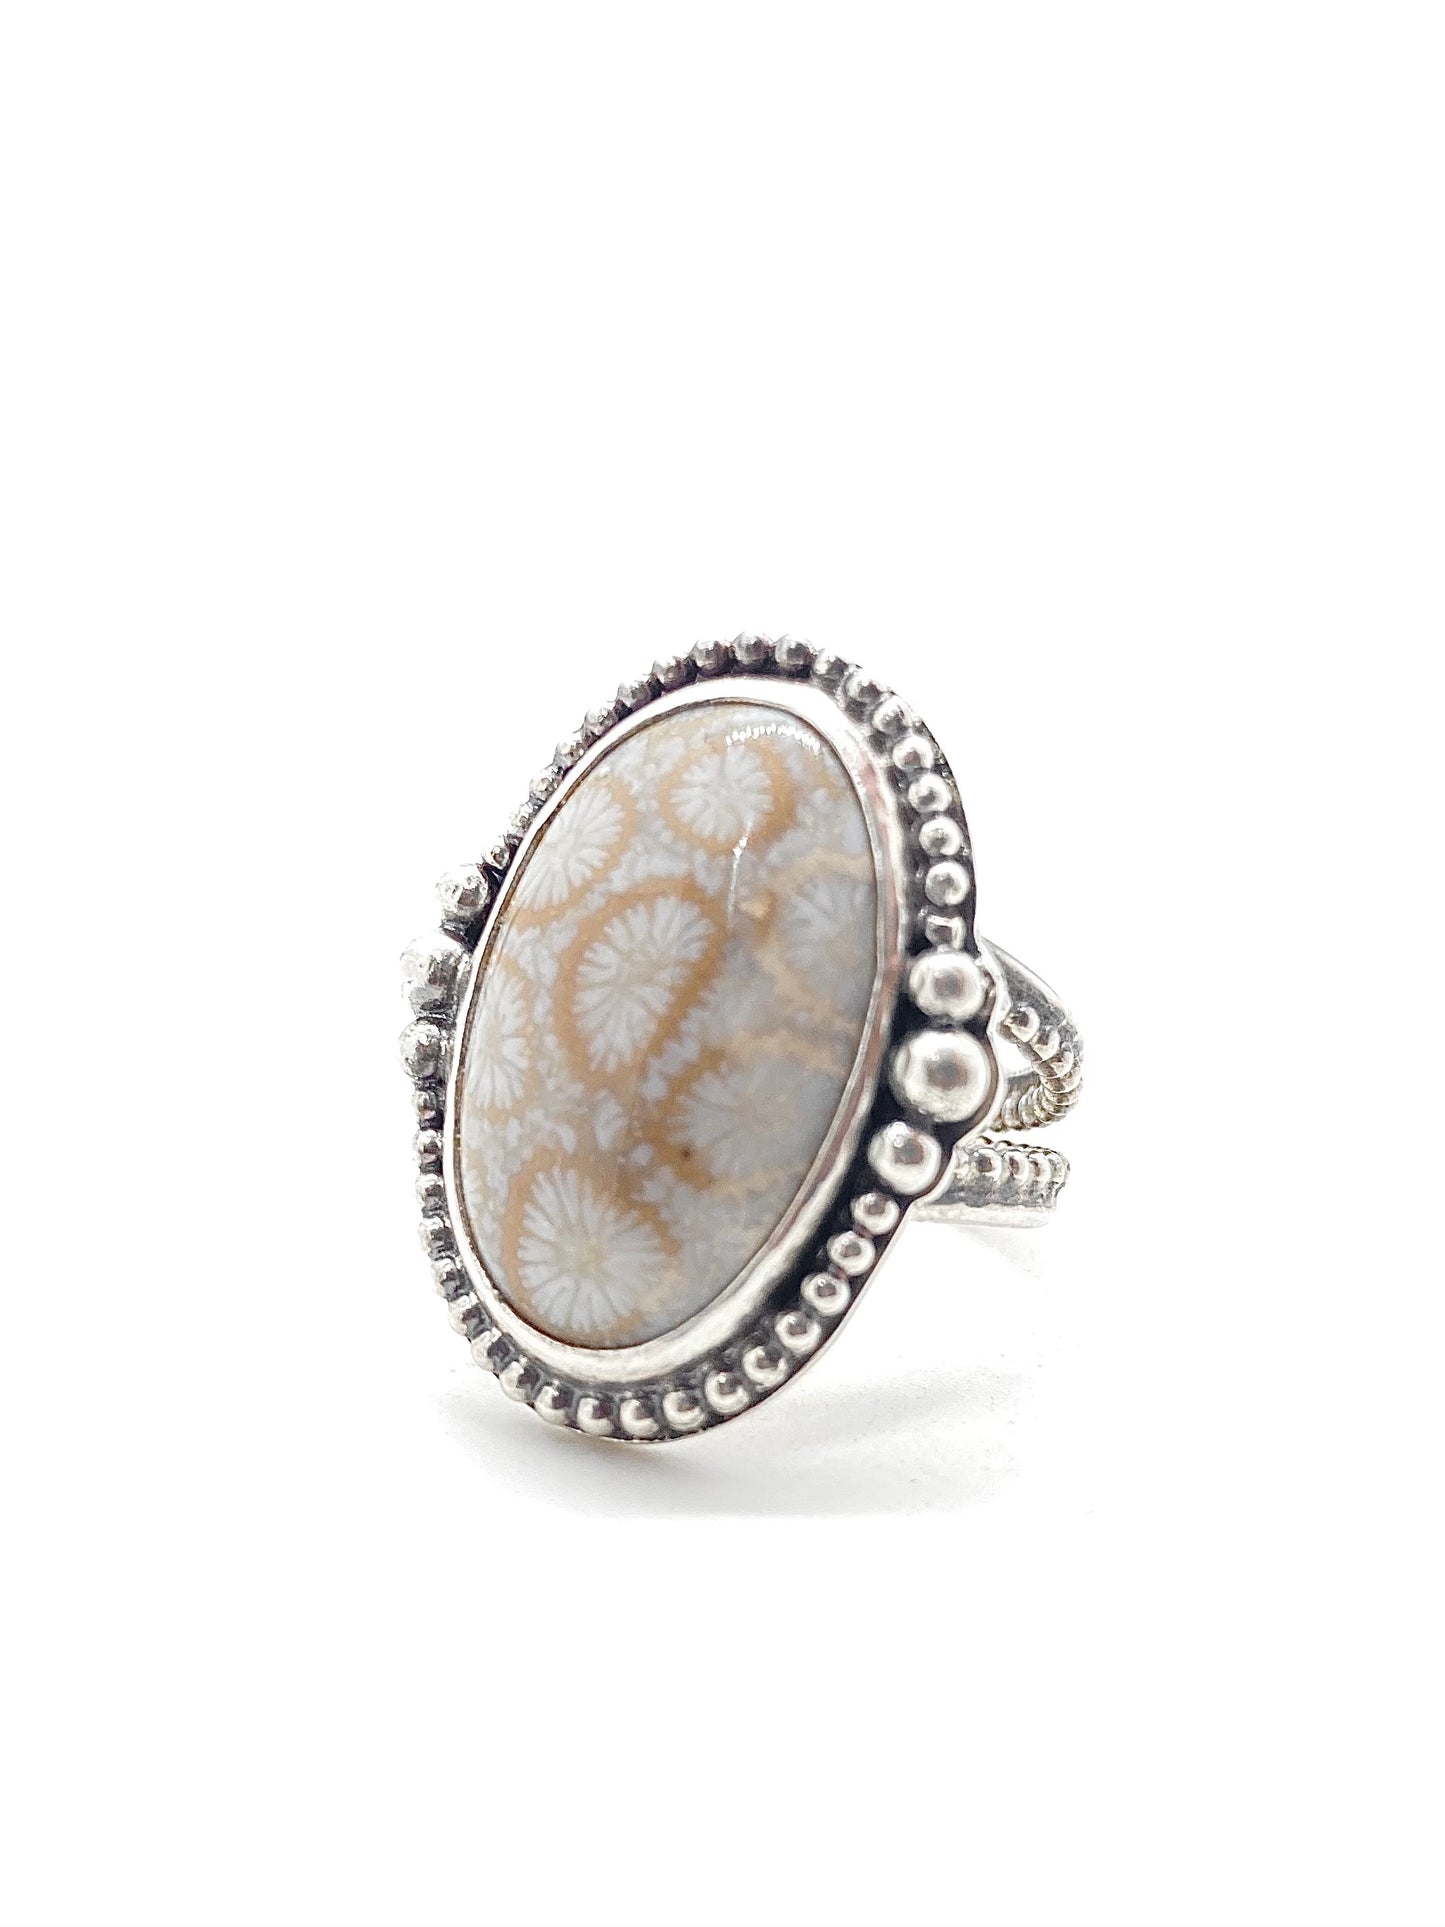 Fossilized Coral Ring in Sterling Silver, size 8.5